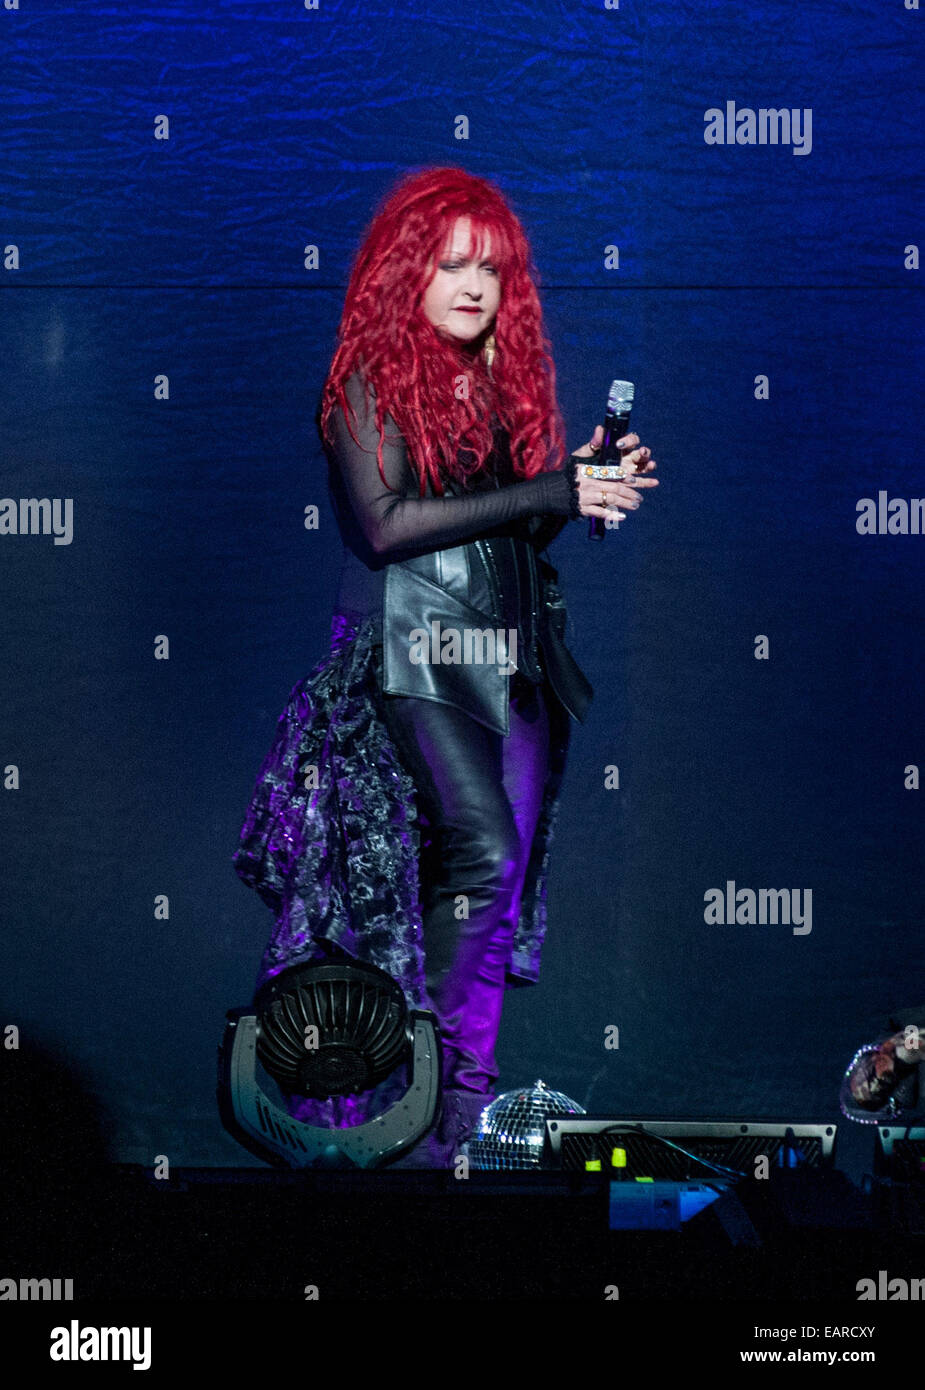 The Goddess of pop and the pioneer of female rock, Cher, presents her  “Dressed To Kill” Tour 2014 at the BB&T Center in Sunrise, Florida.  American singer-songwriter, Cyndi Lauper joins Cher as